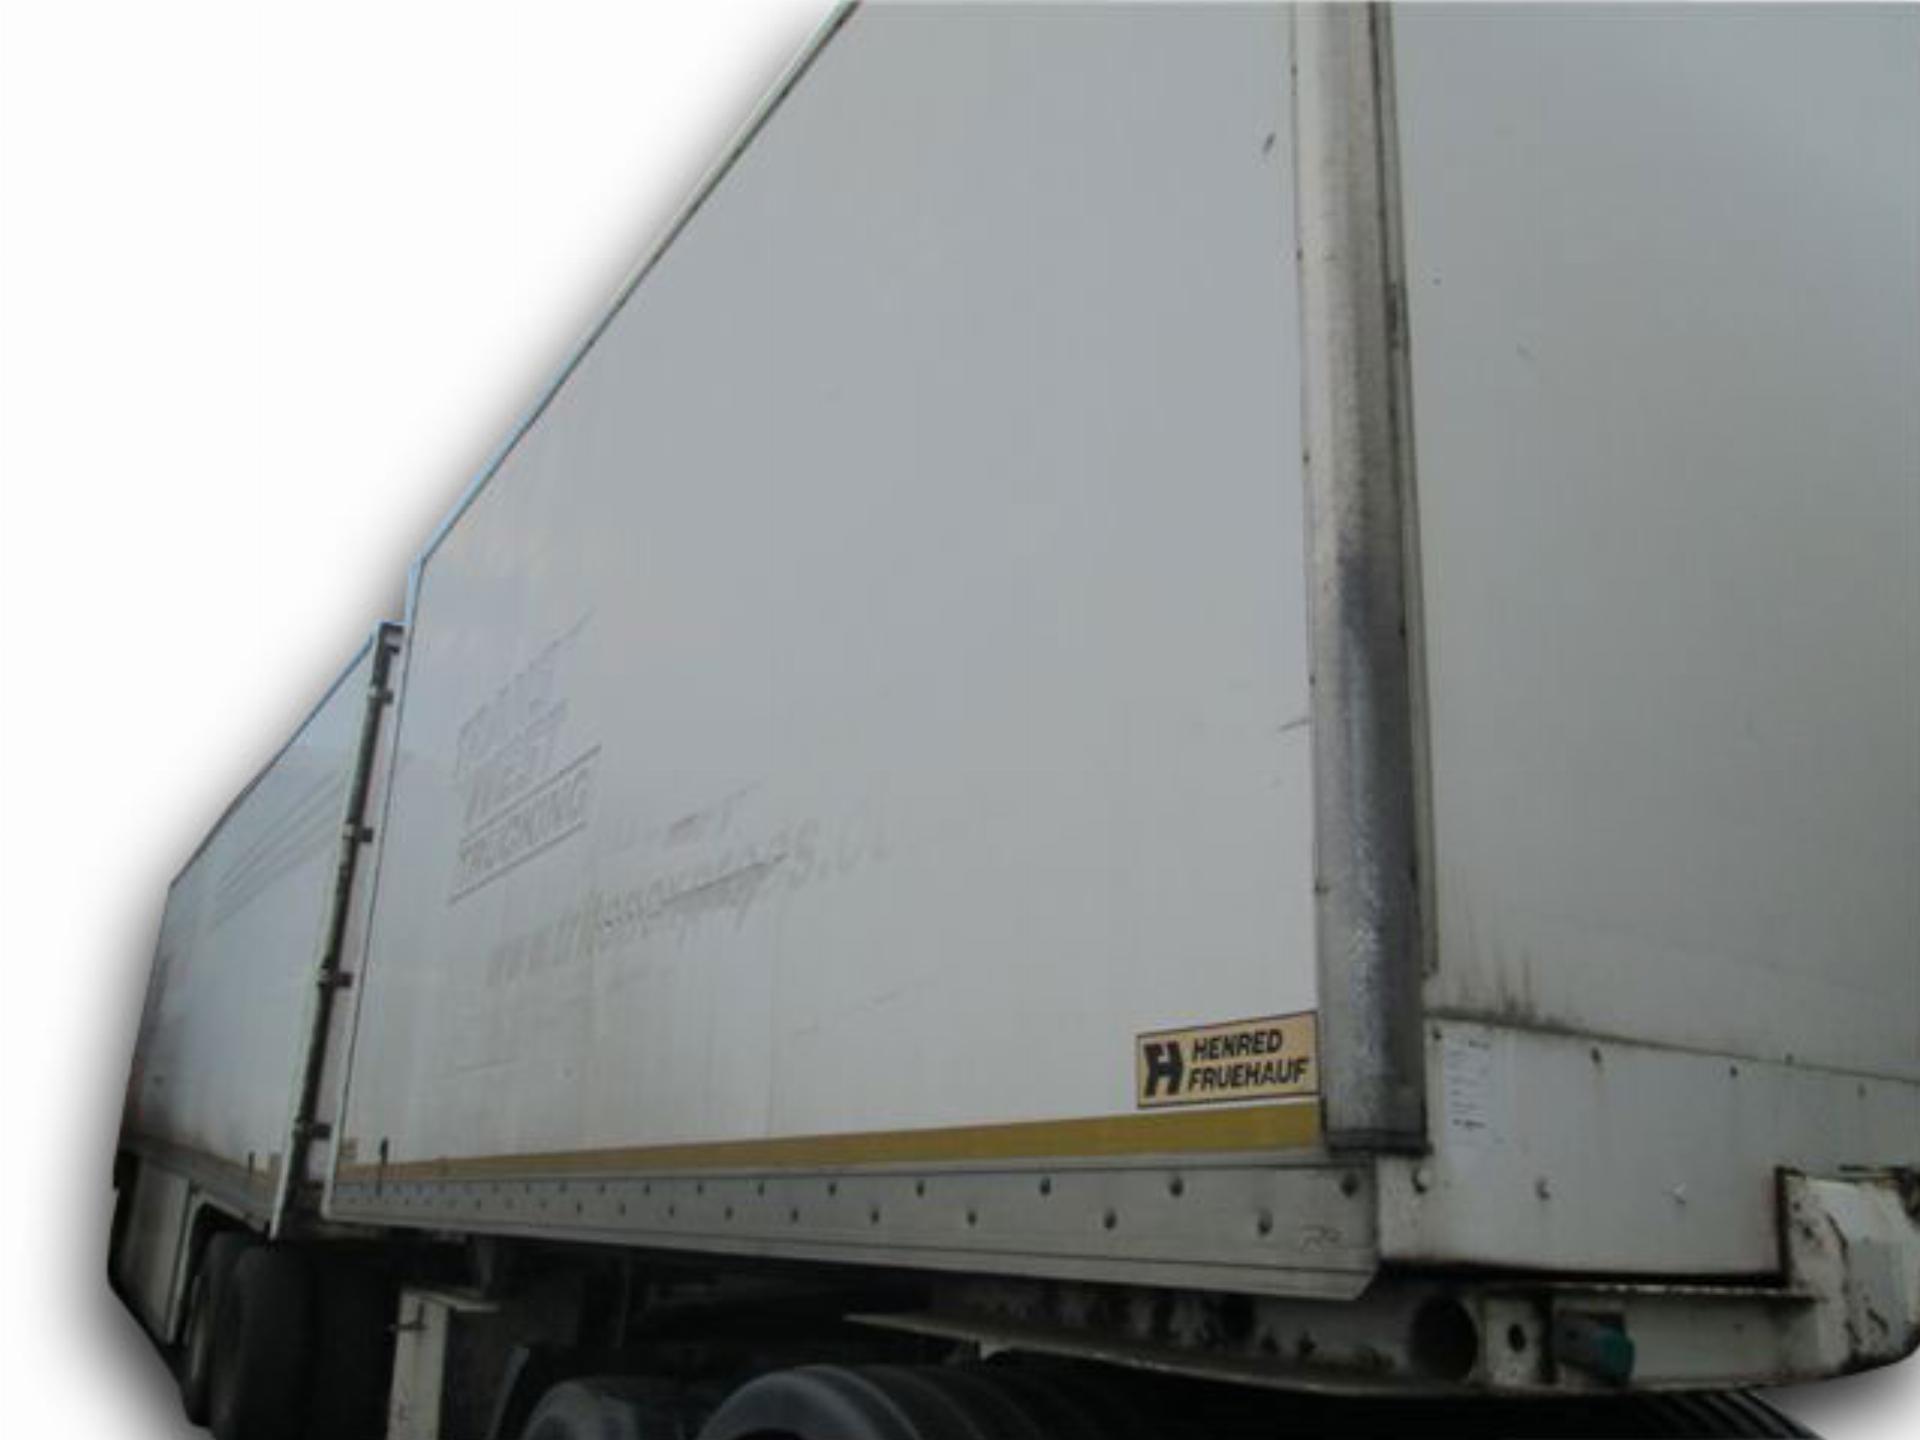 Hendred Fruehauf Superlink GRP Boxed Trailers With Abs Braking